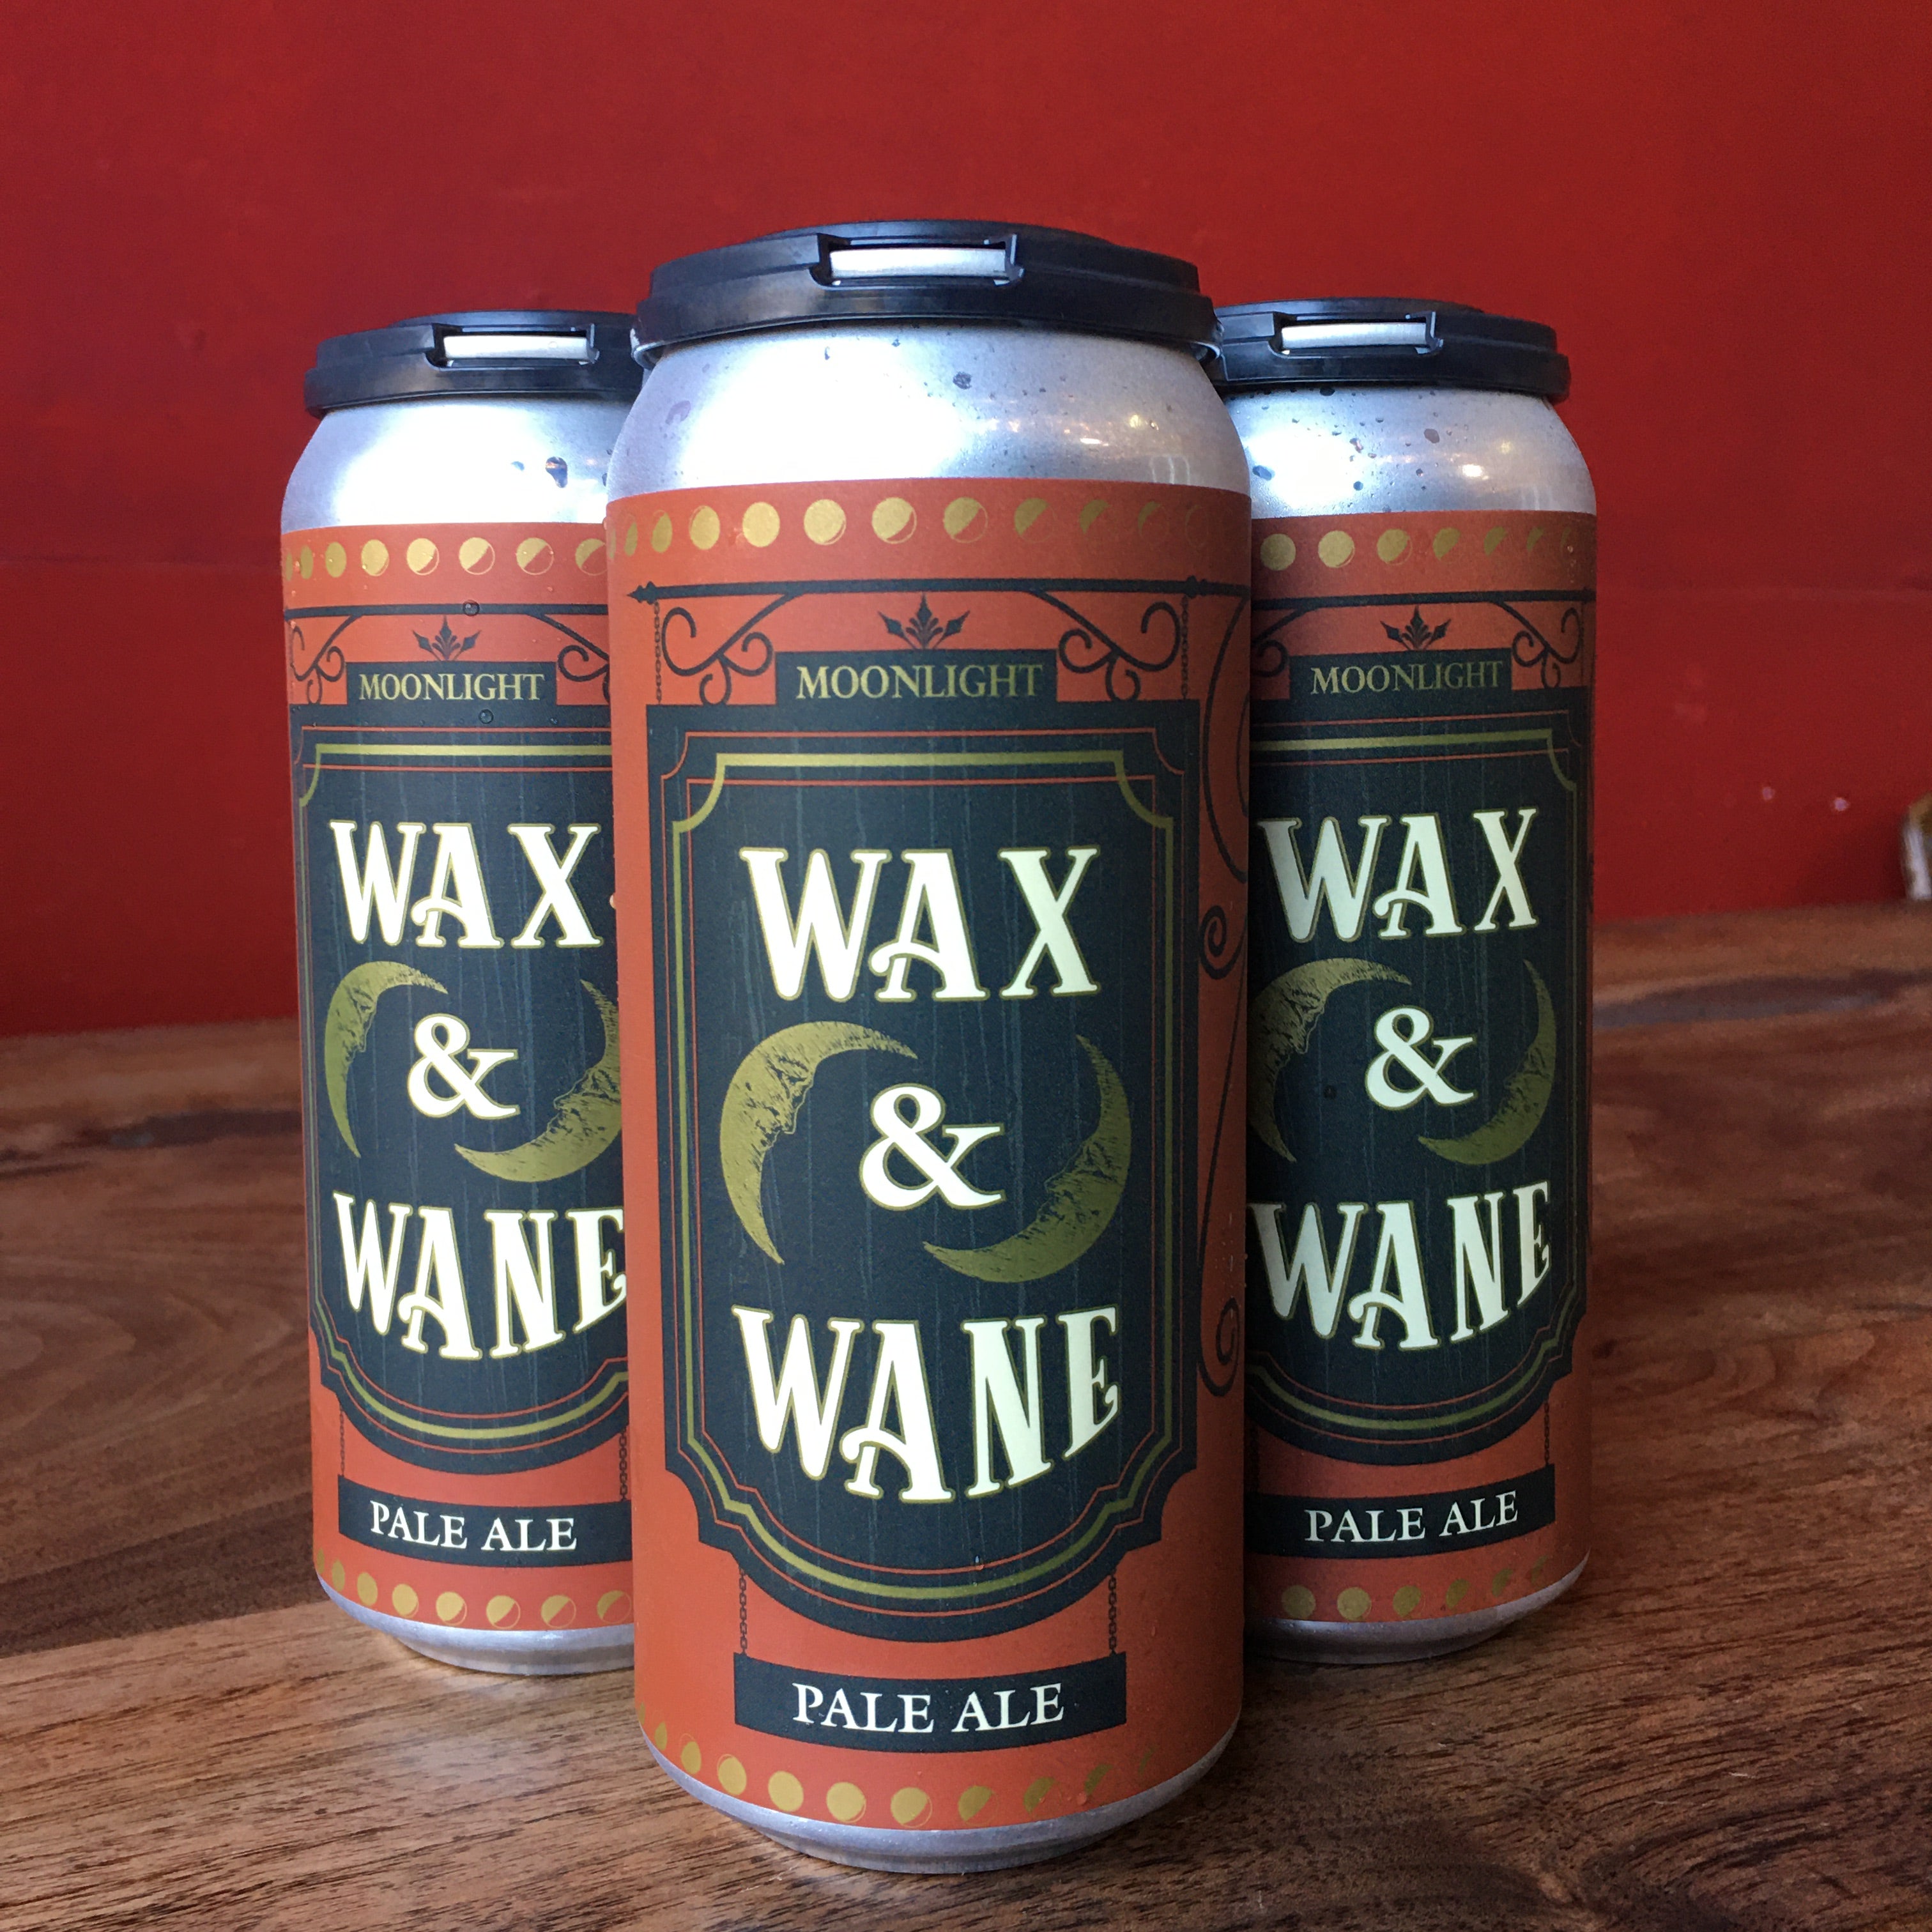 4 Pack of Wax and Wane English-Style Pale Ale